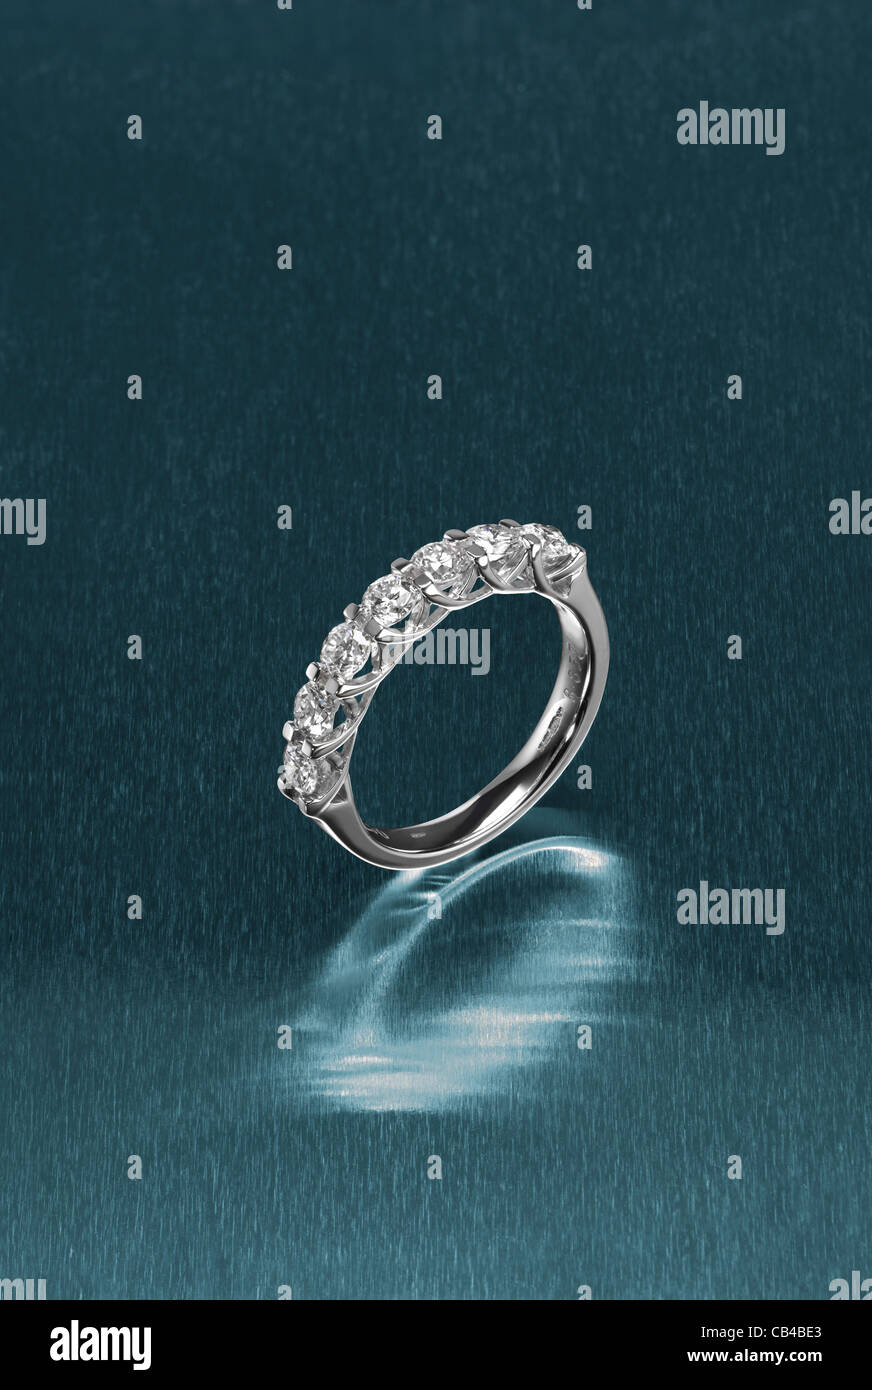 18ct white gold engagement or half eternity ring Stock Photo